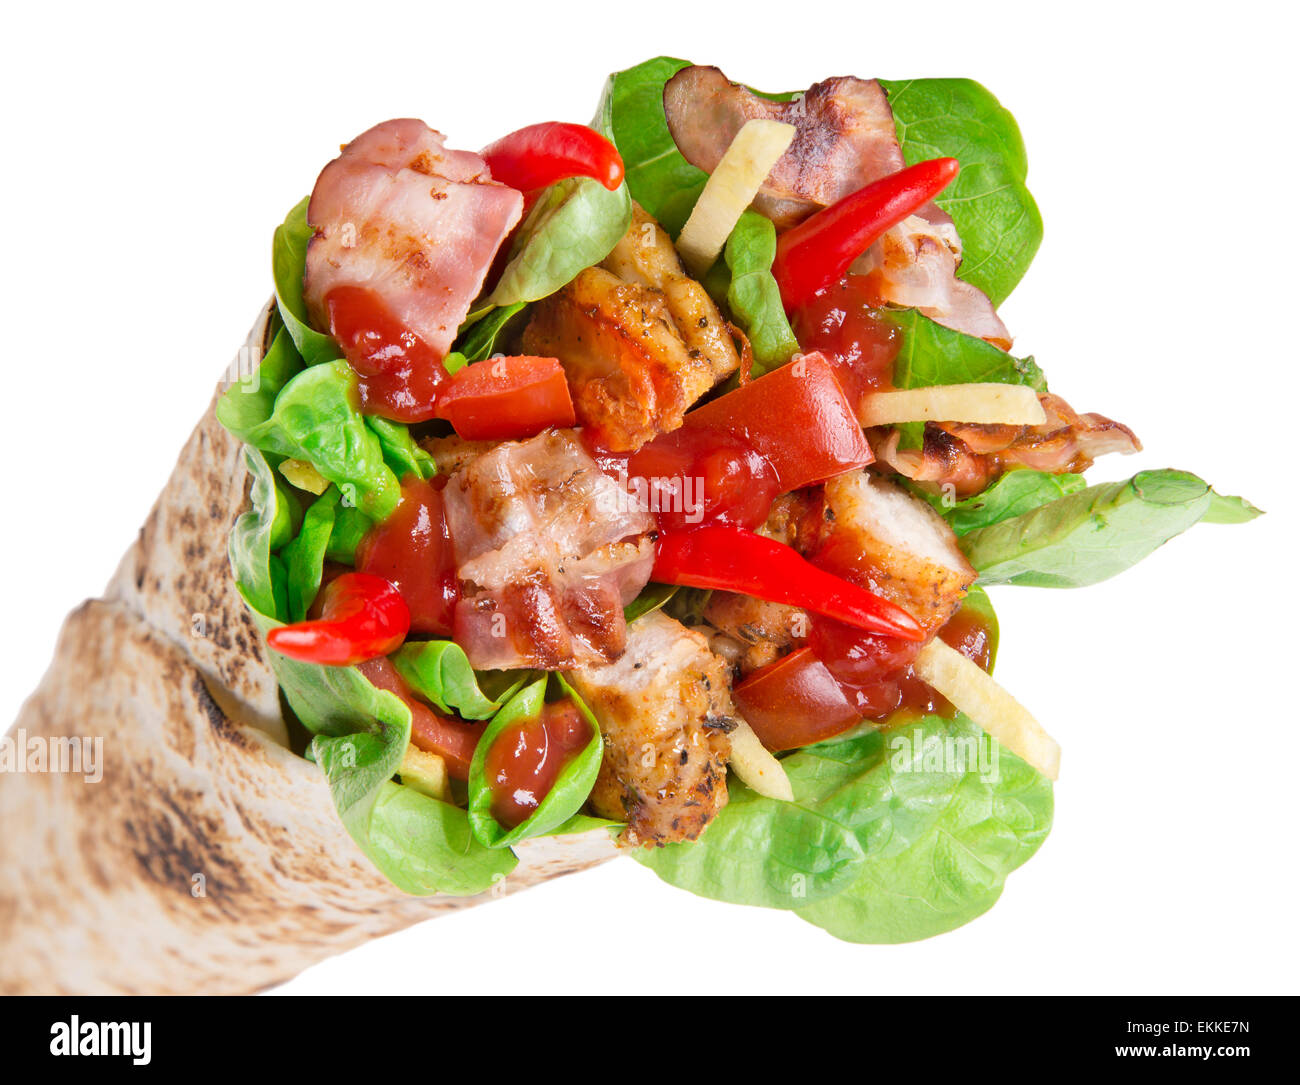 Chicken slices in a Tortilla Wrap with Lettuce over white. Stock Photo